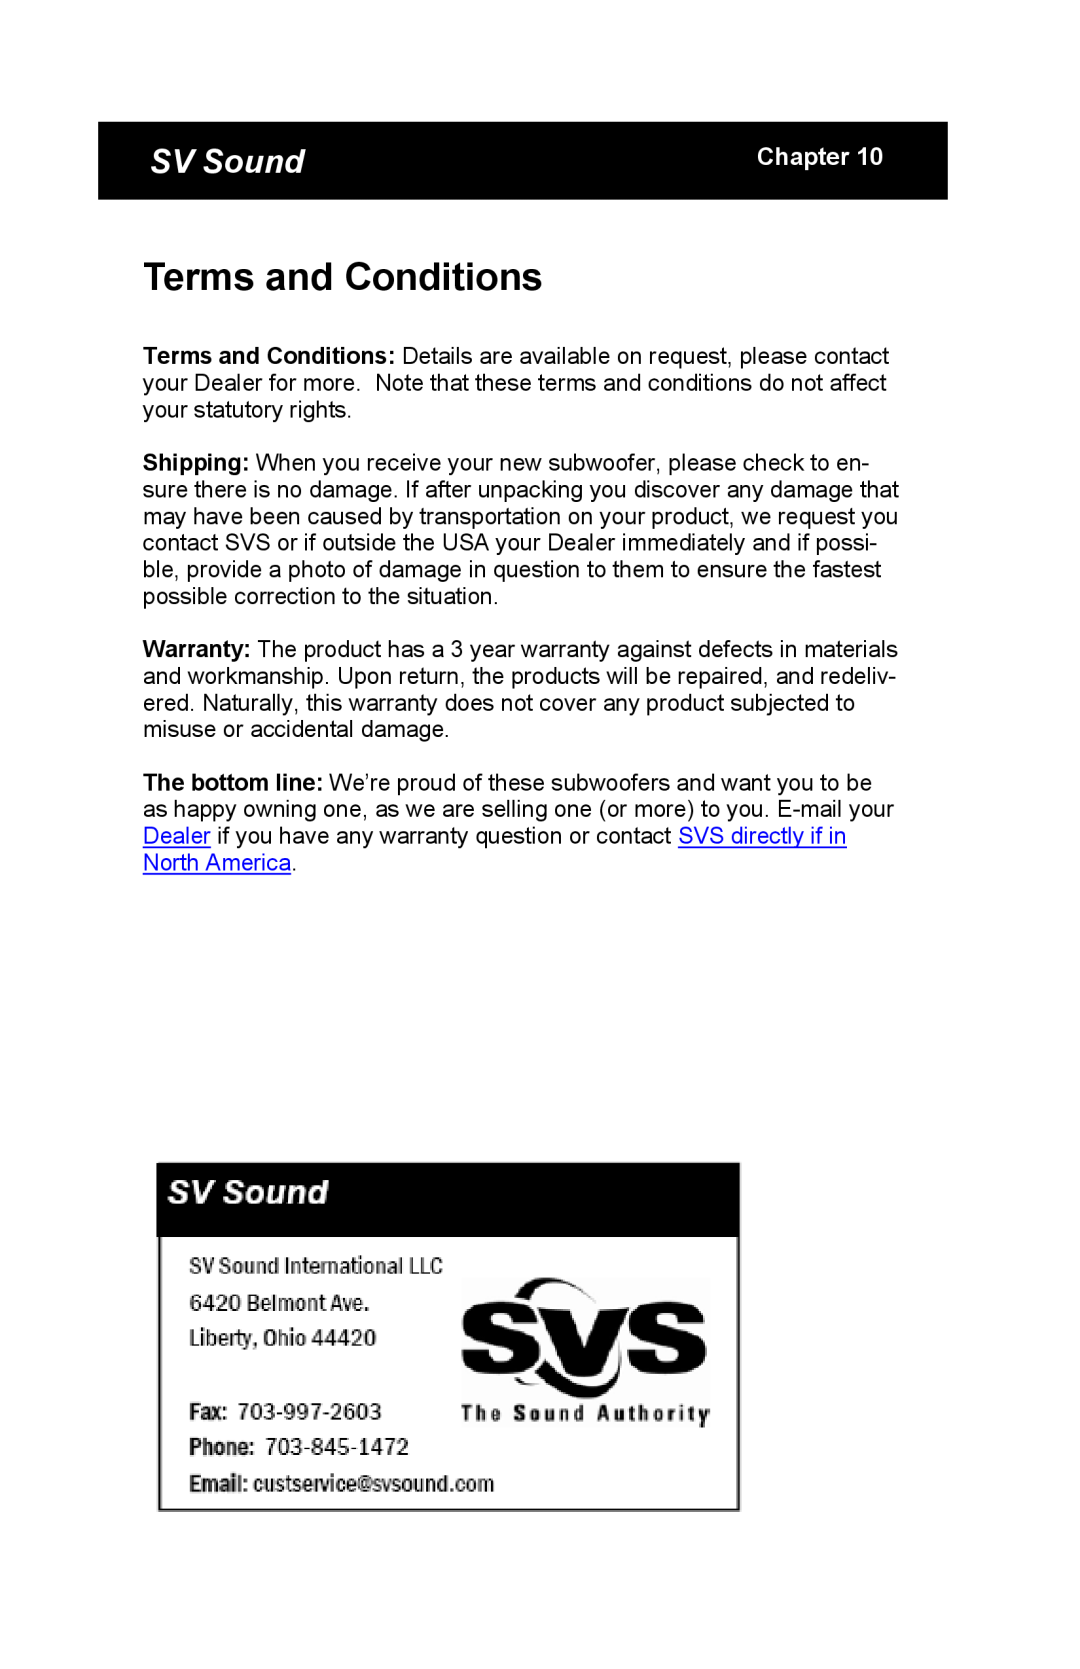 SV Sound SB12-Plus specifications Terms and Conditions, SV Sound, Chapter 